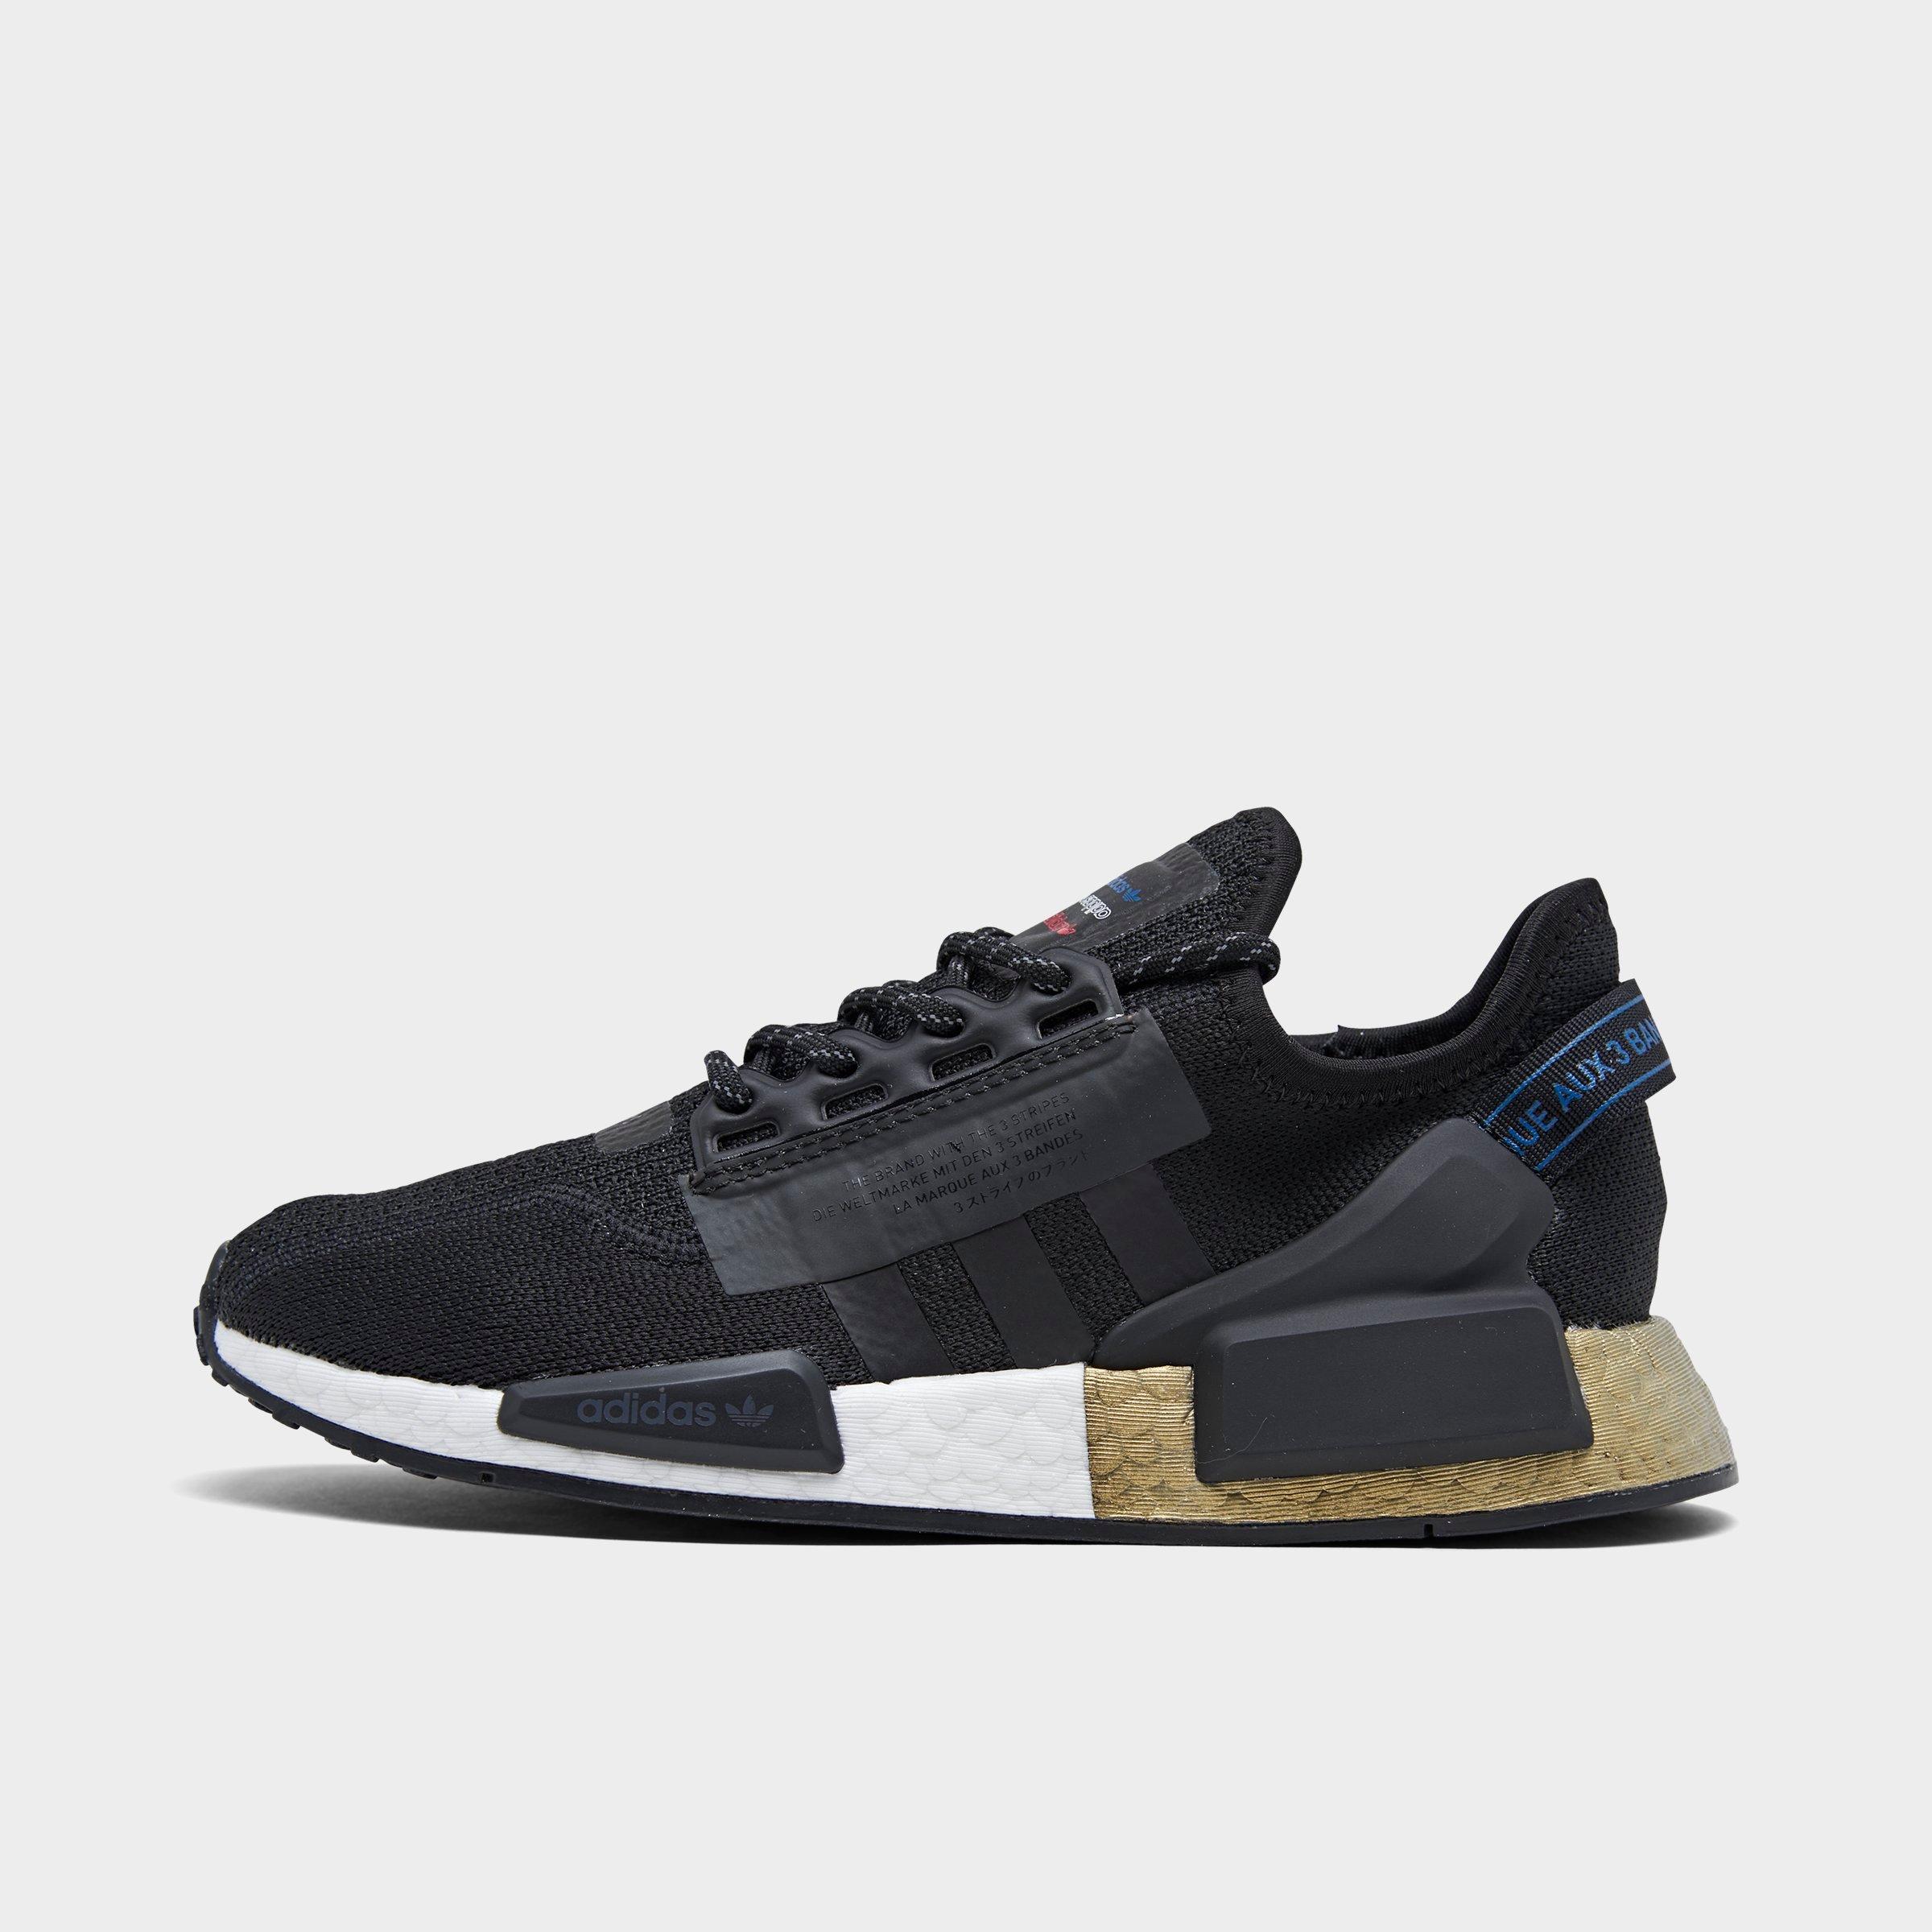 NMD R1 GTX Shoes in 2020 Shoes Black shoes Fashion sneakers